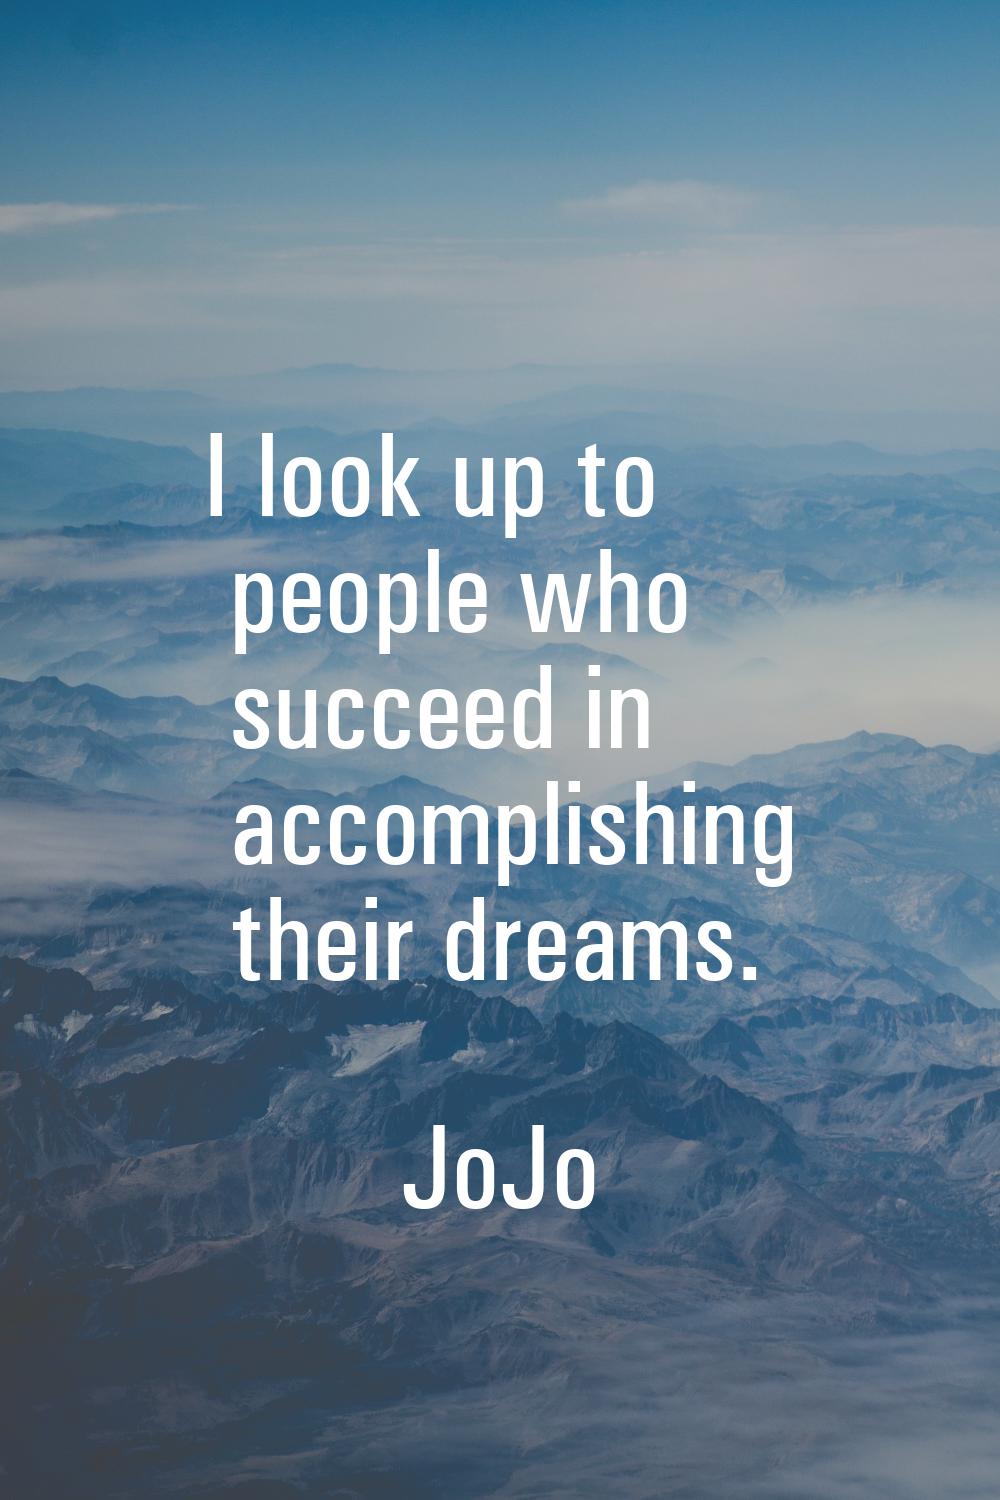 I look up to people who succeed in accomplishing their dreams.